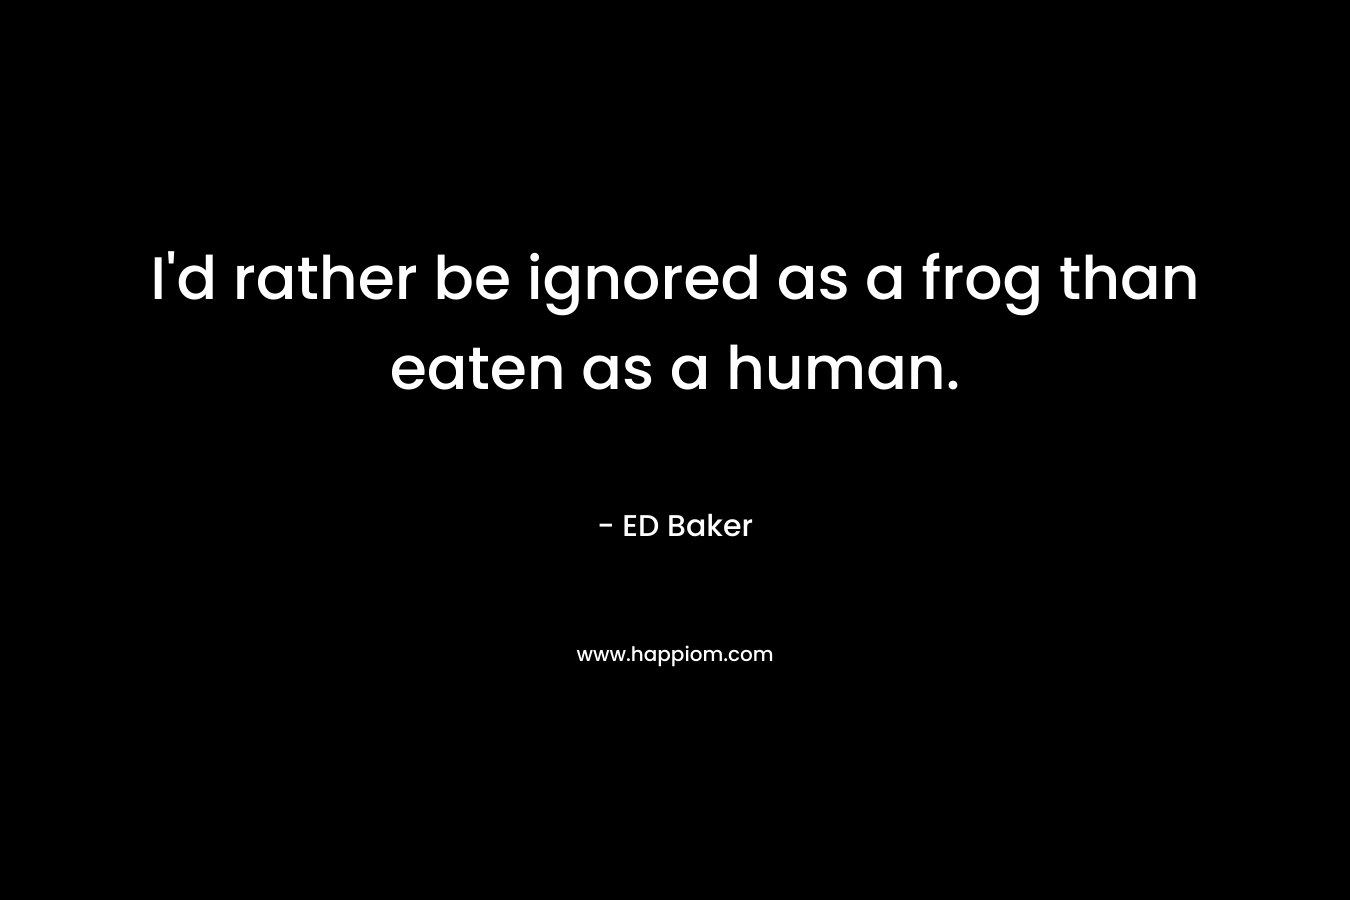 I’d rather be ignored as a frog than eaten as a human. – ED Baker